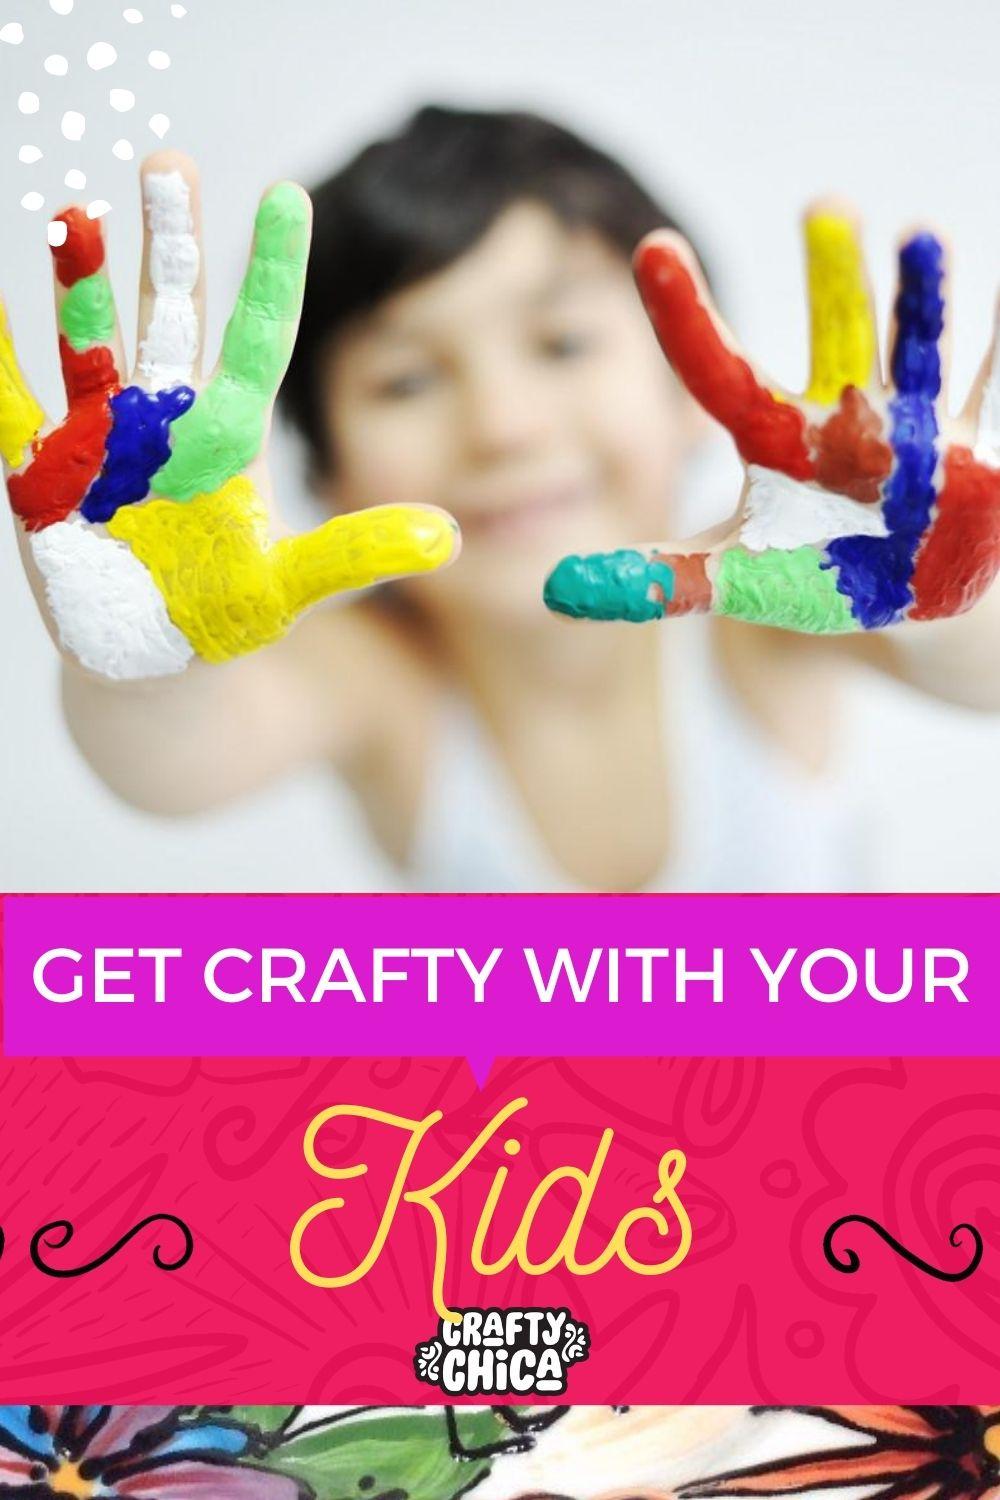 Get crafty with your kids!